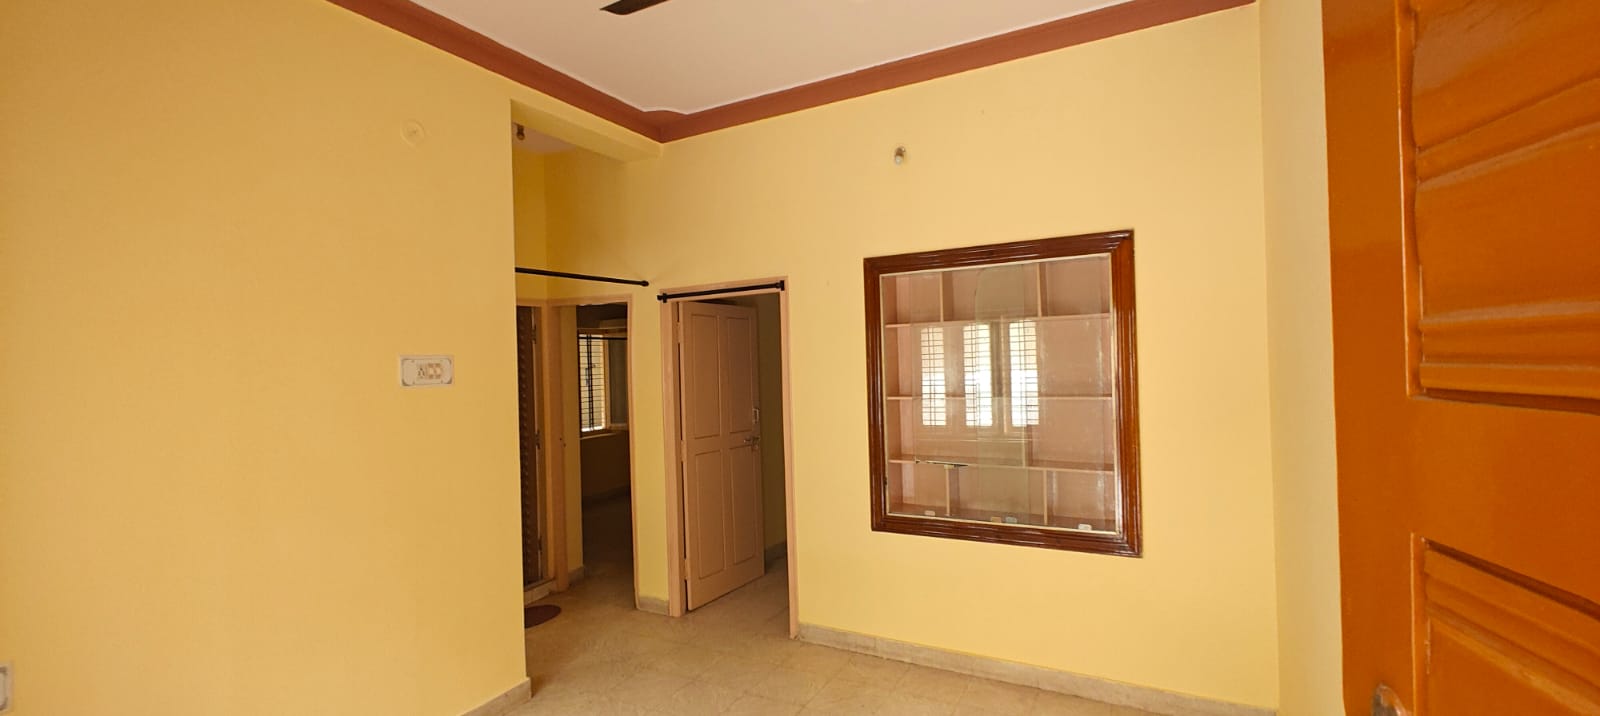 1 BHK Independent House for Lease Only at JAML2 - 3471 in Ejipura